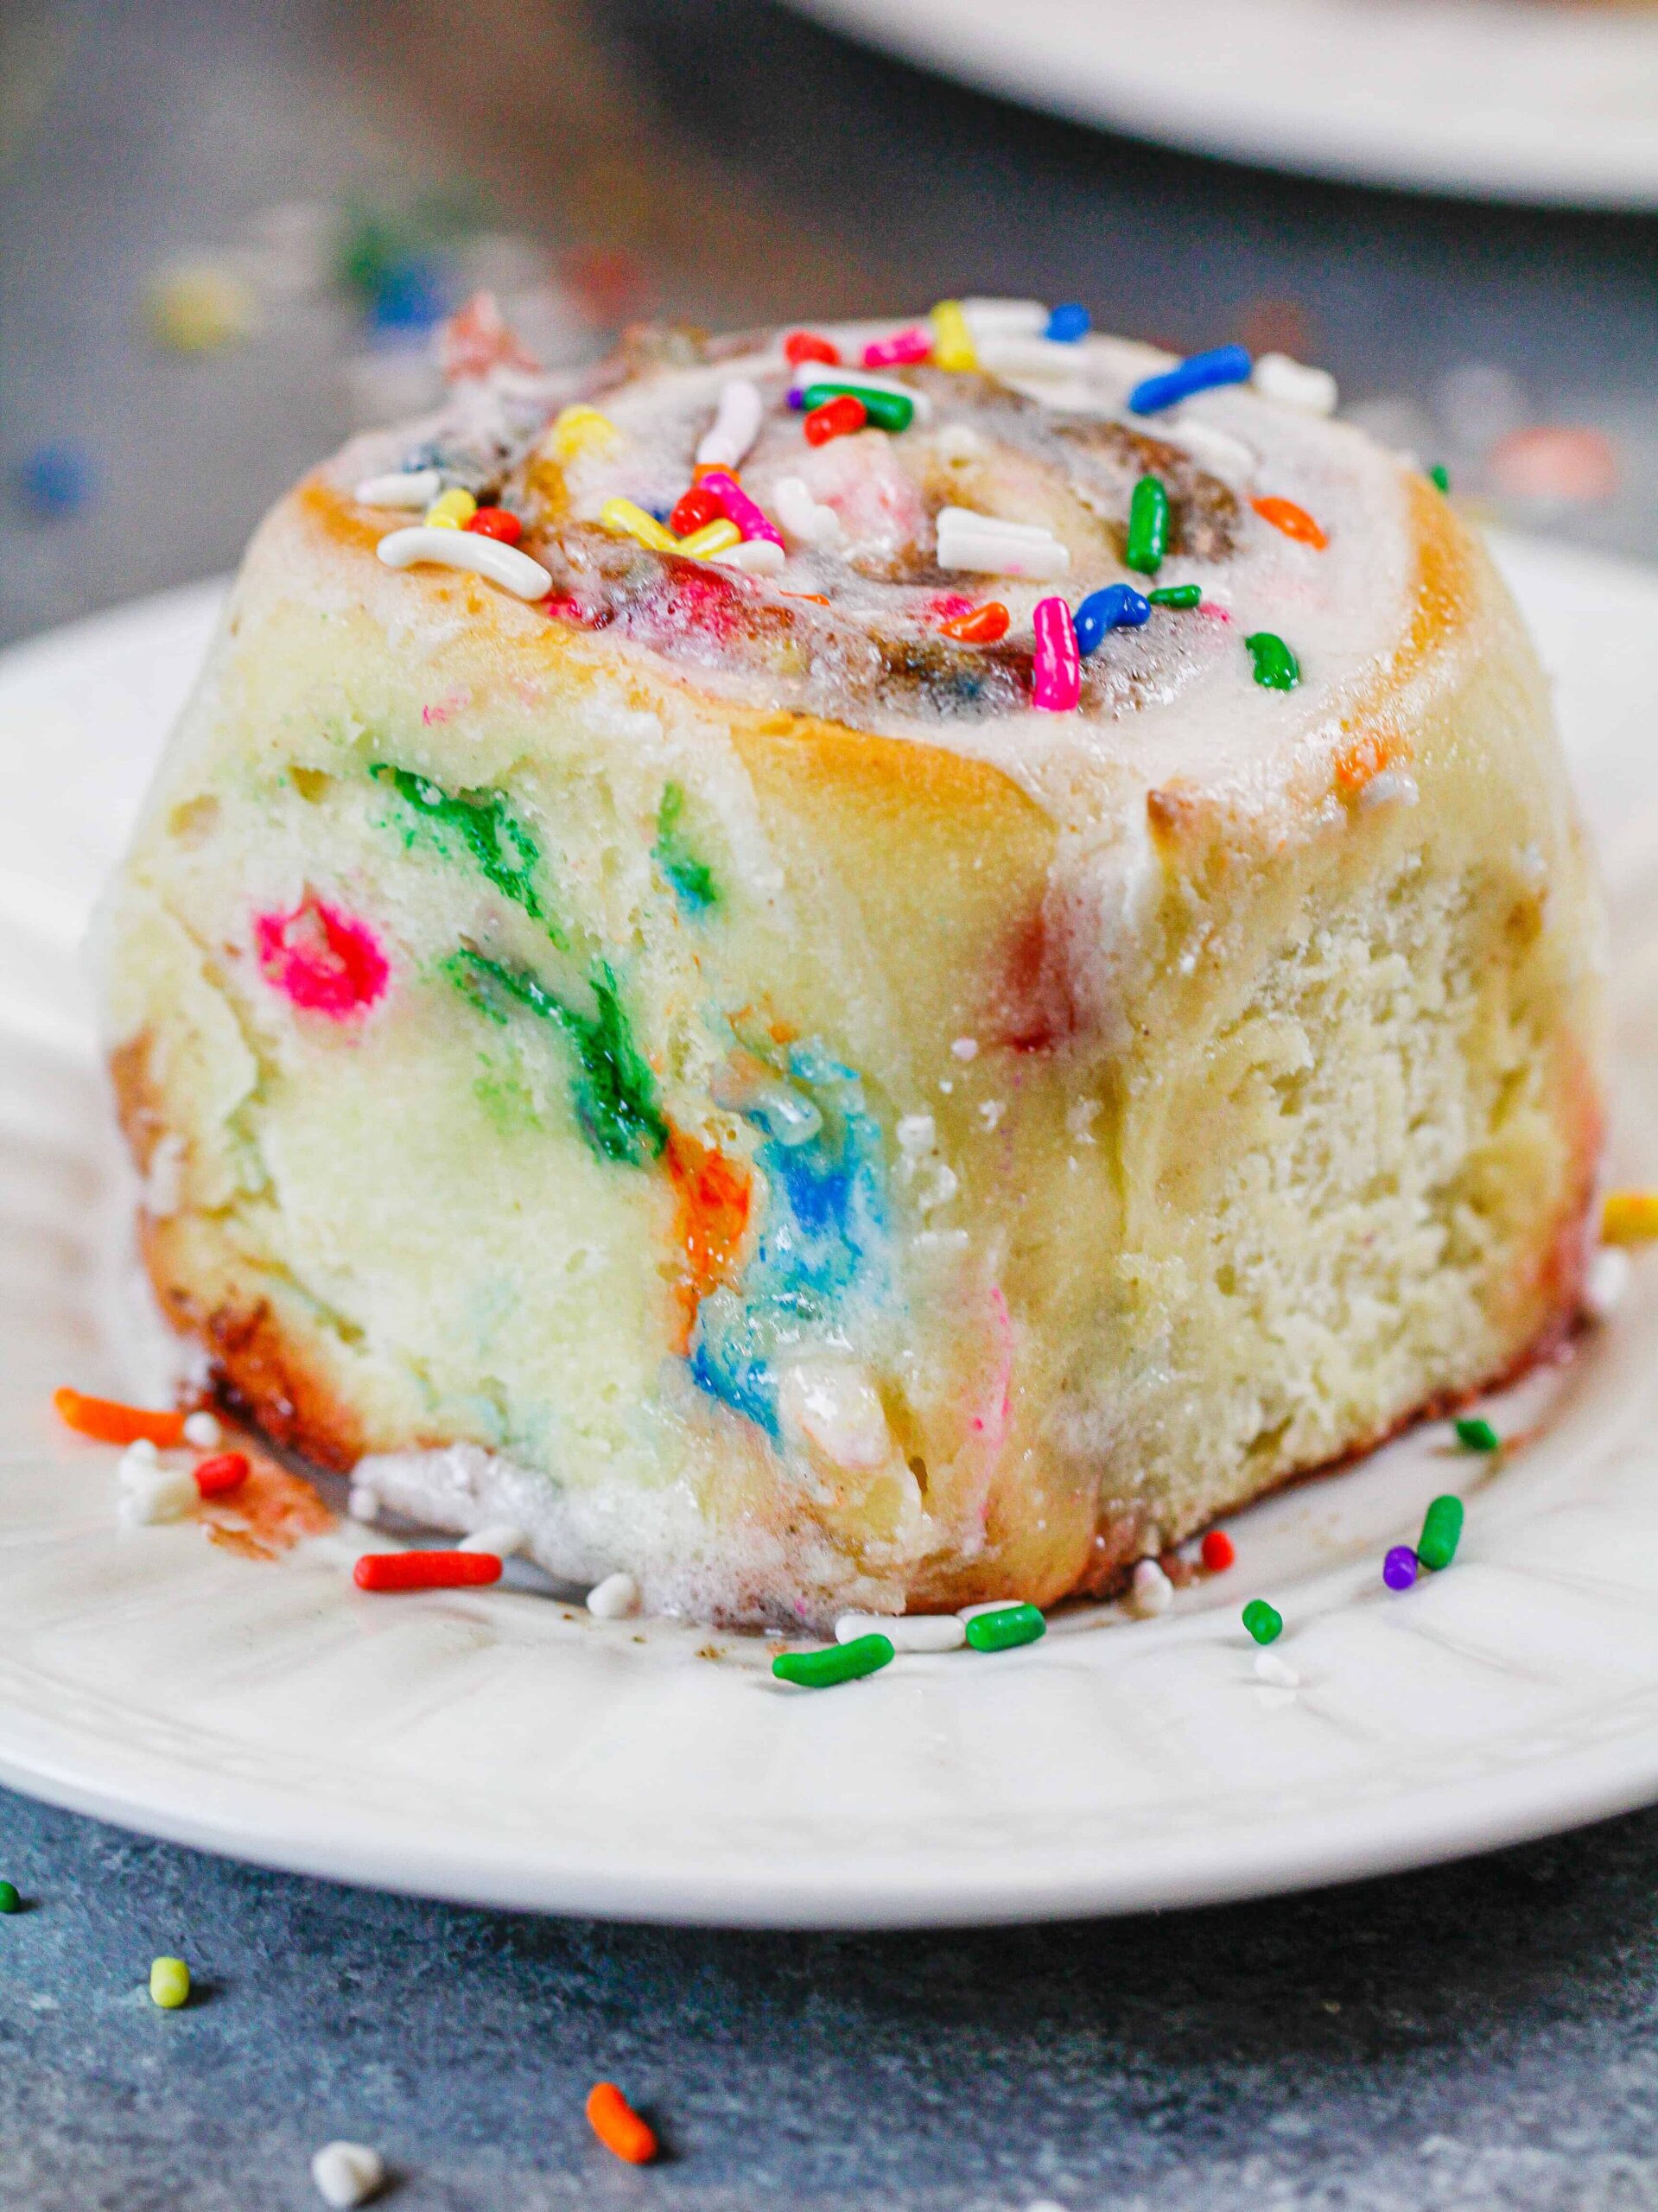 image of baked funfetti cinnamon roll on a plate, ready to be eaten